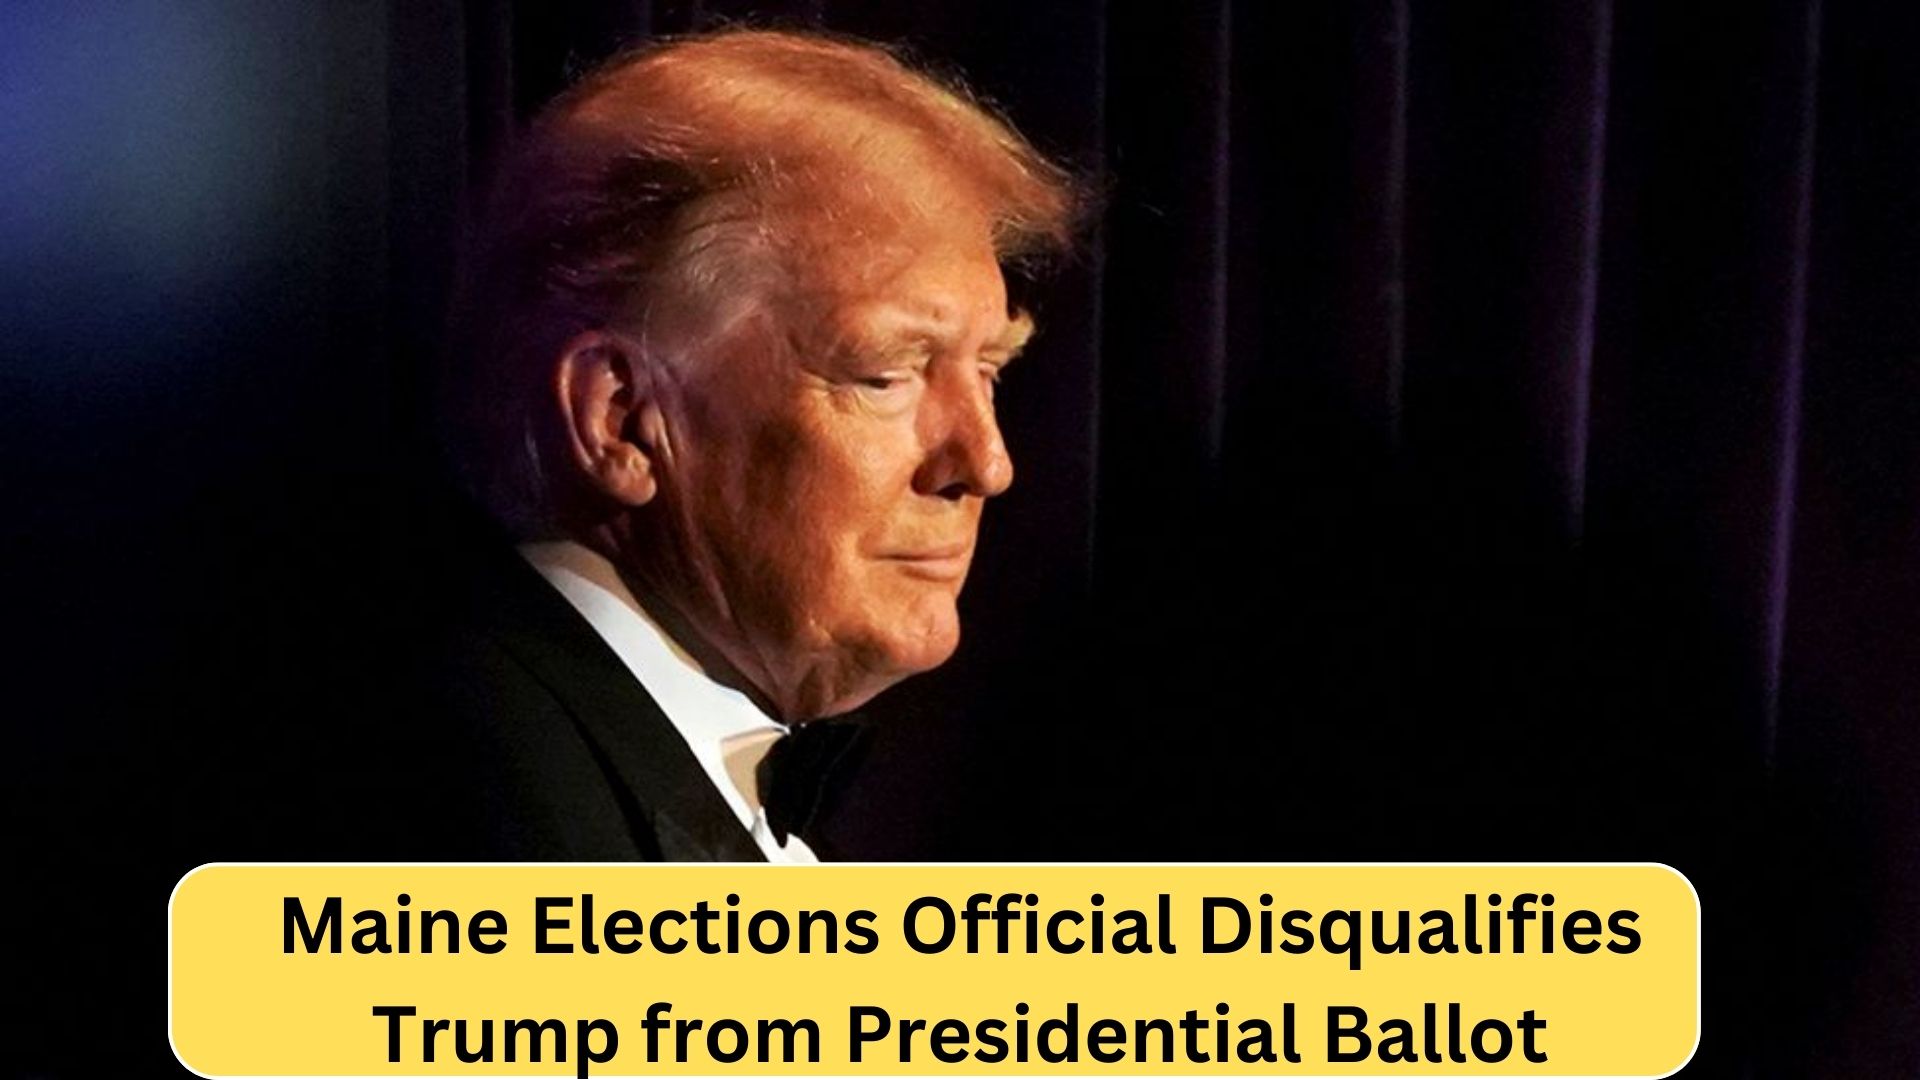 Maine's election official rules Trump ineligible ap politics ap comparative politics Trump Disqualification News of President Trump Maine Elections Official Disqualifies Trump 